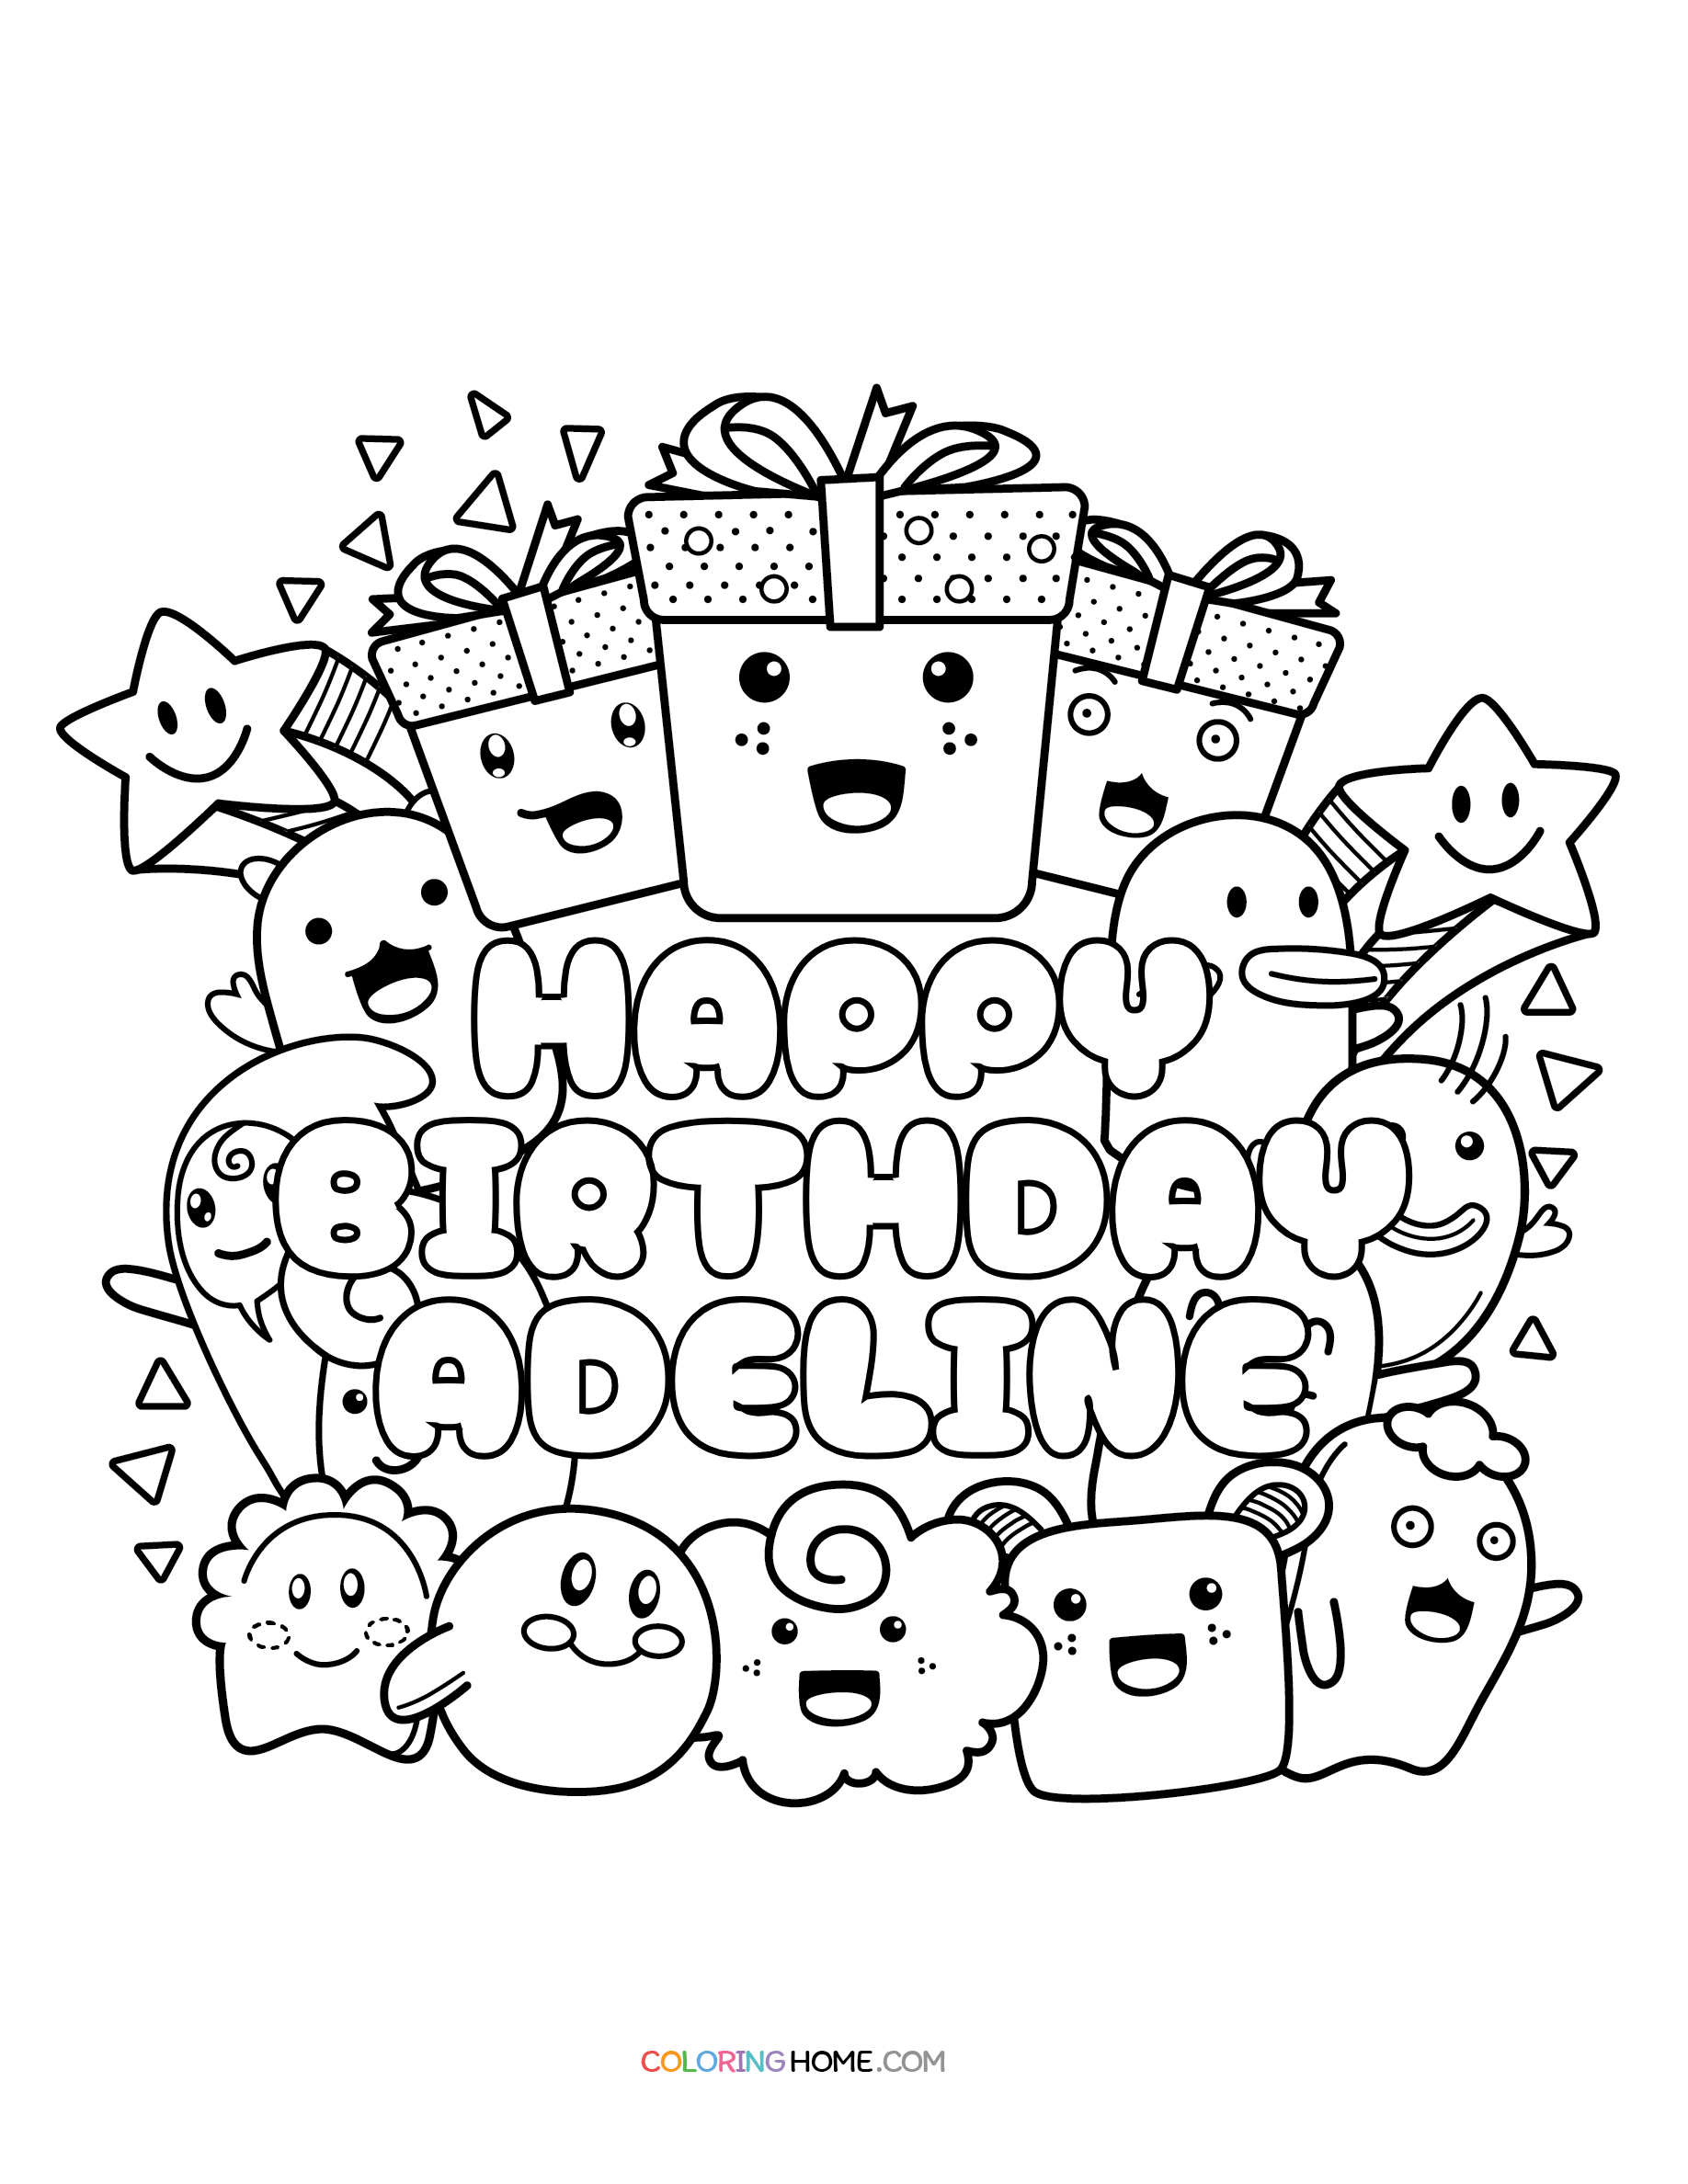 Happy Birthday Adeline coloring page